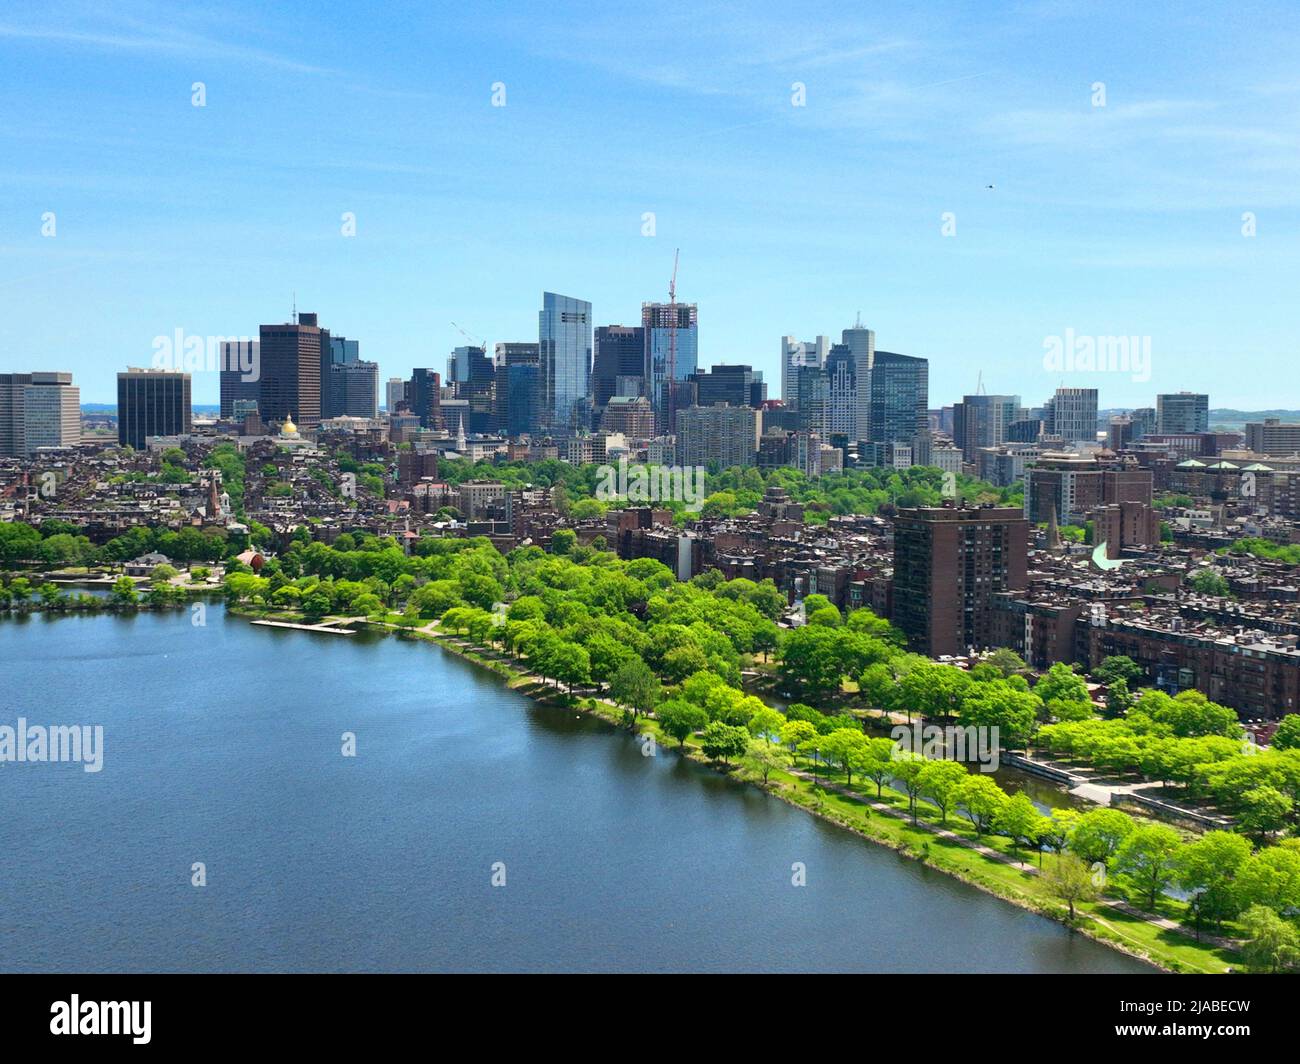 Boston financial district modern city skyline aerial view with Charles River, Beacon Hill historic district and Charles River Esplanade in Boston, Mas Stock Photo